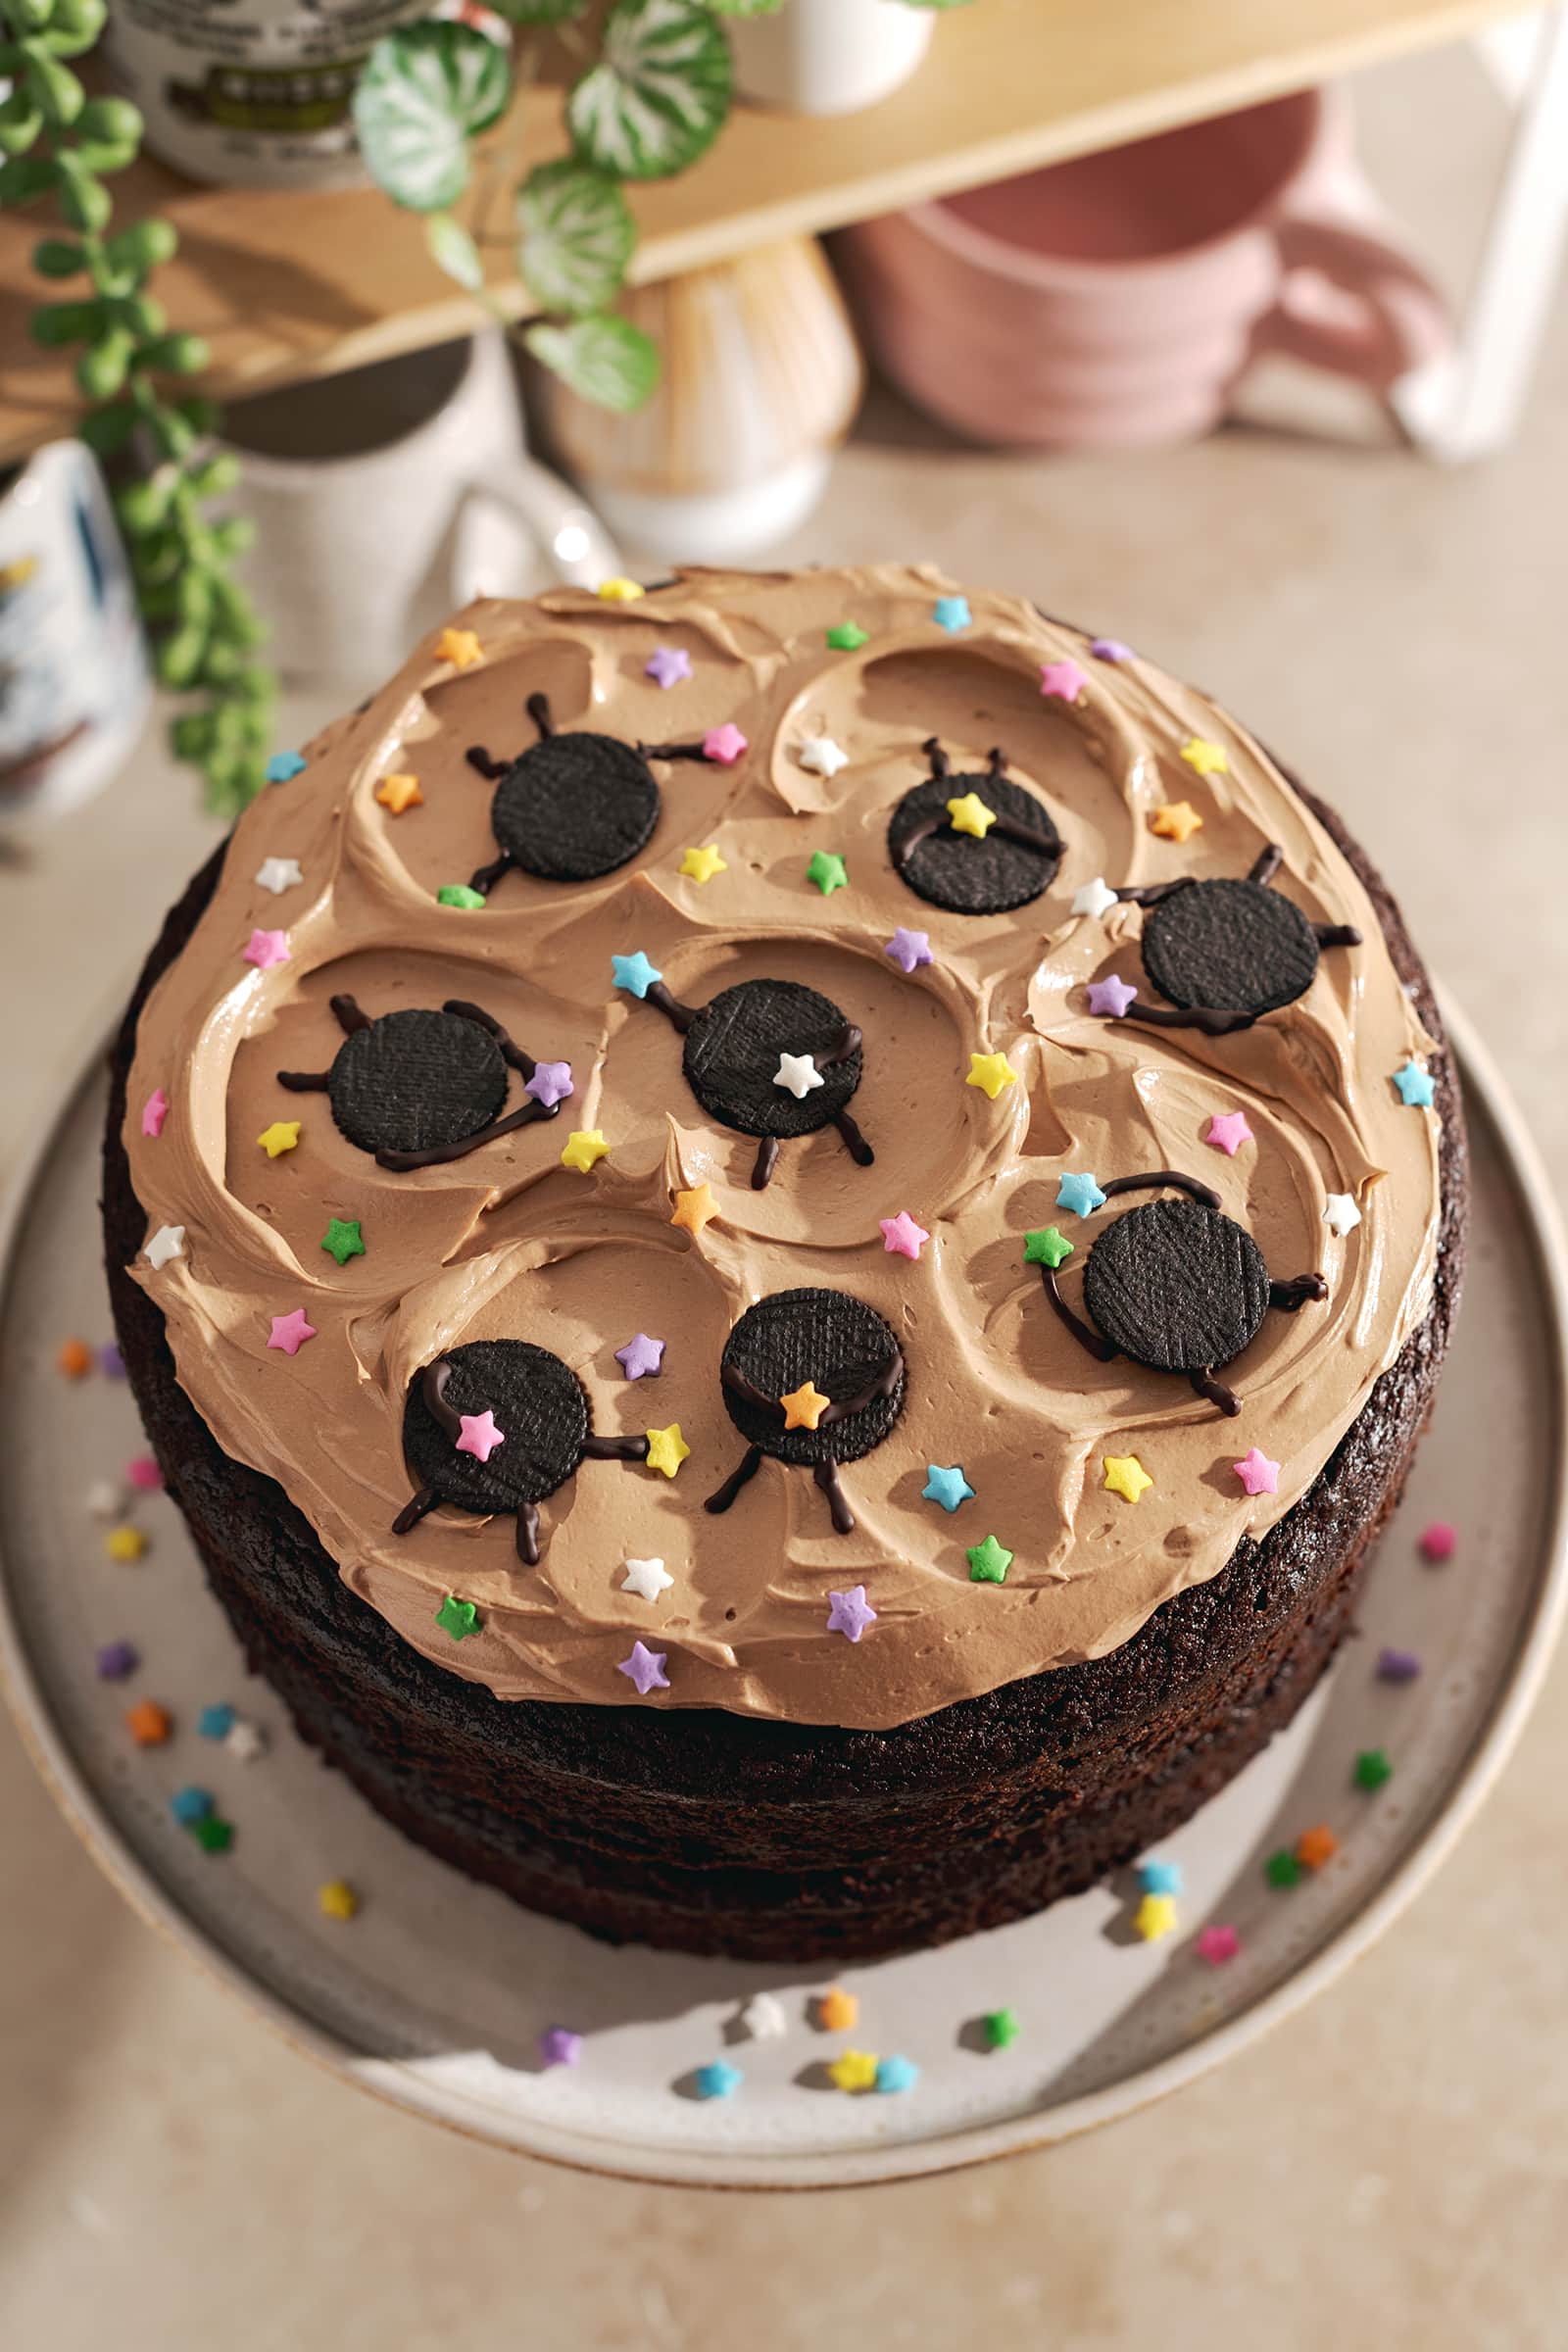 Mini oreo soot sprites and star sprinkles on top of chocolate buttercream on a chocolate cake.